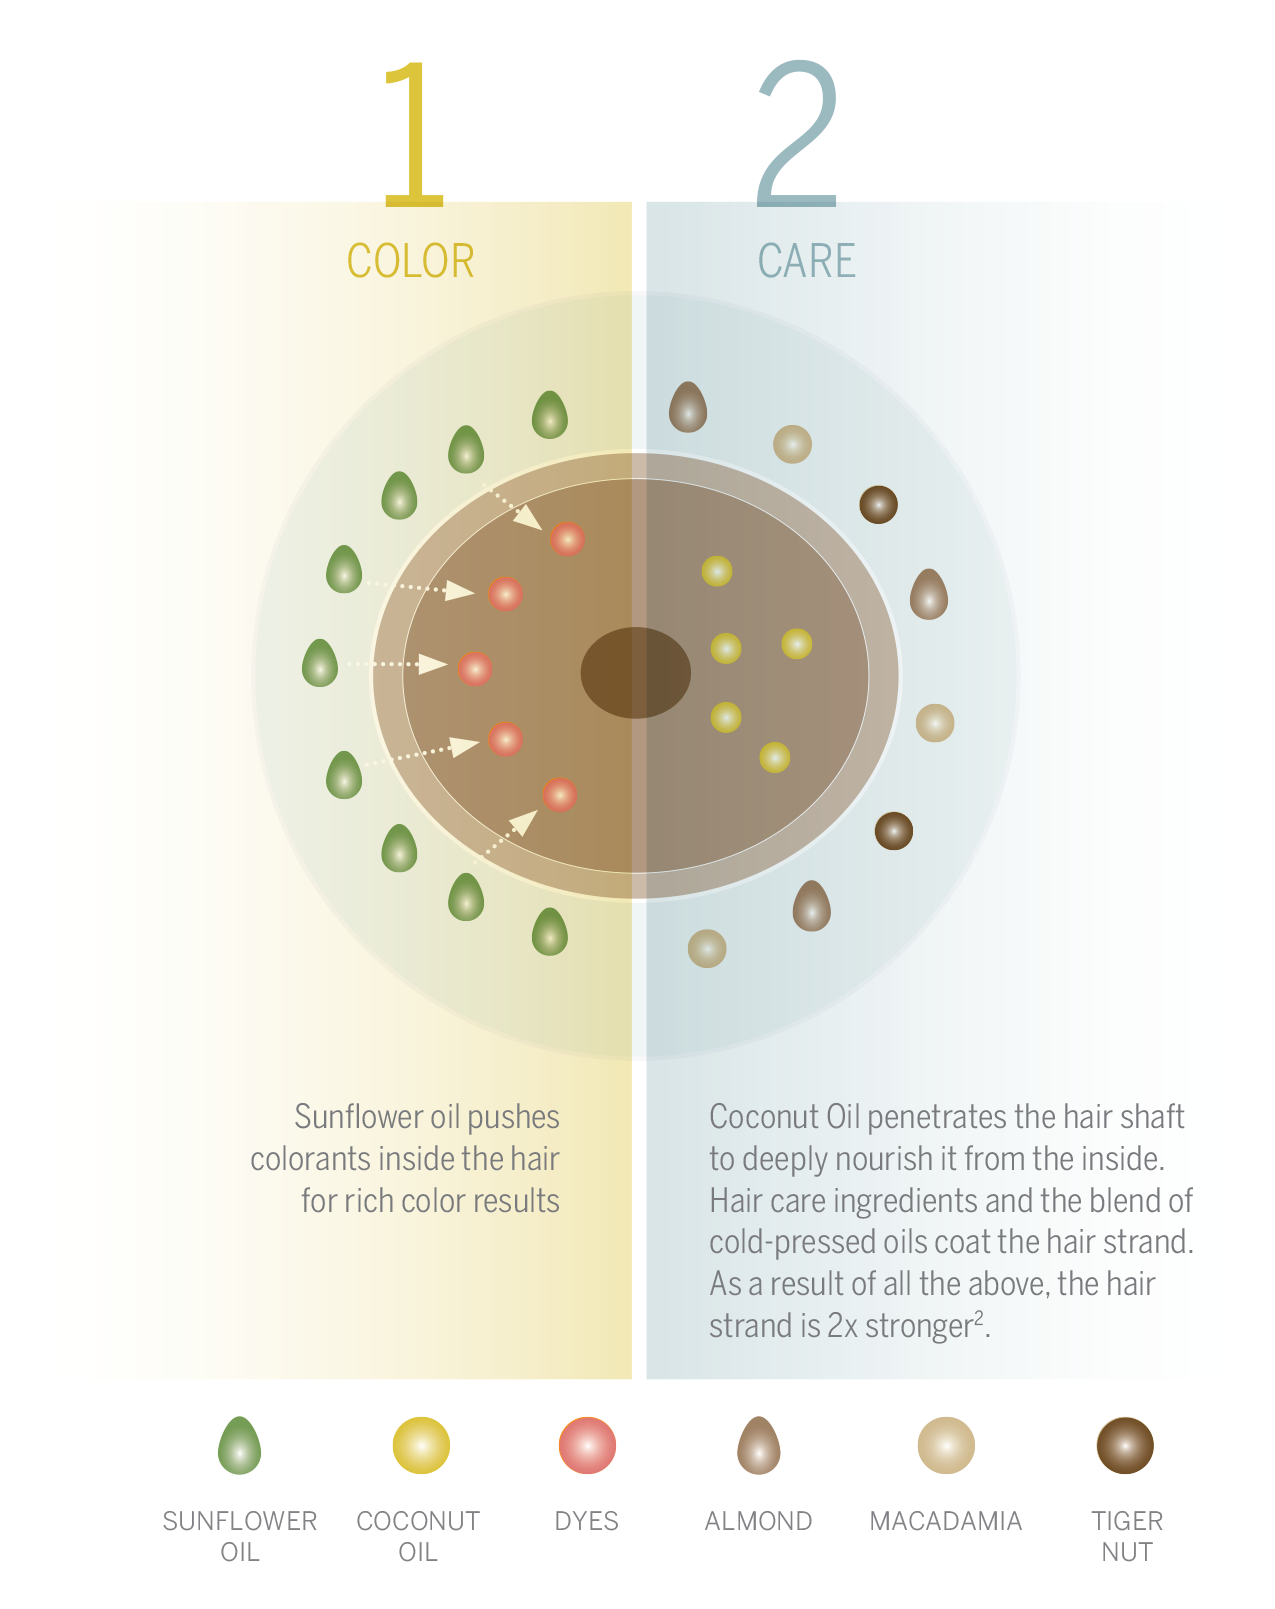 A diagram that shows how the dual-action vegan color system improves hair care & color